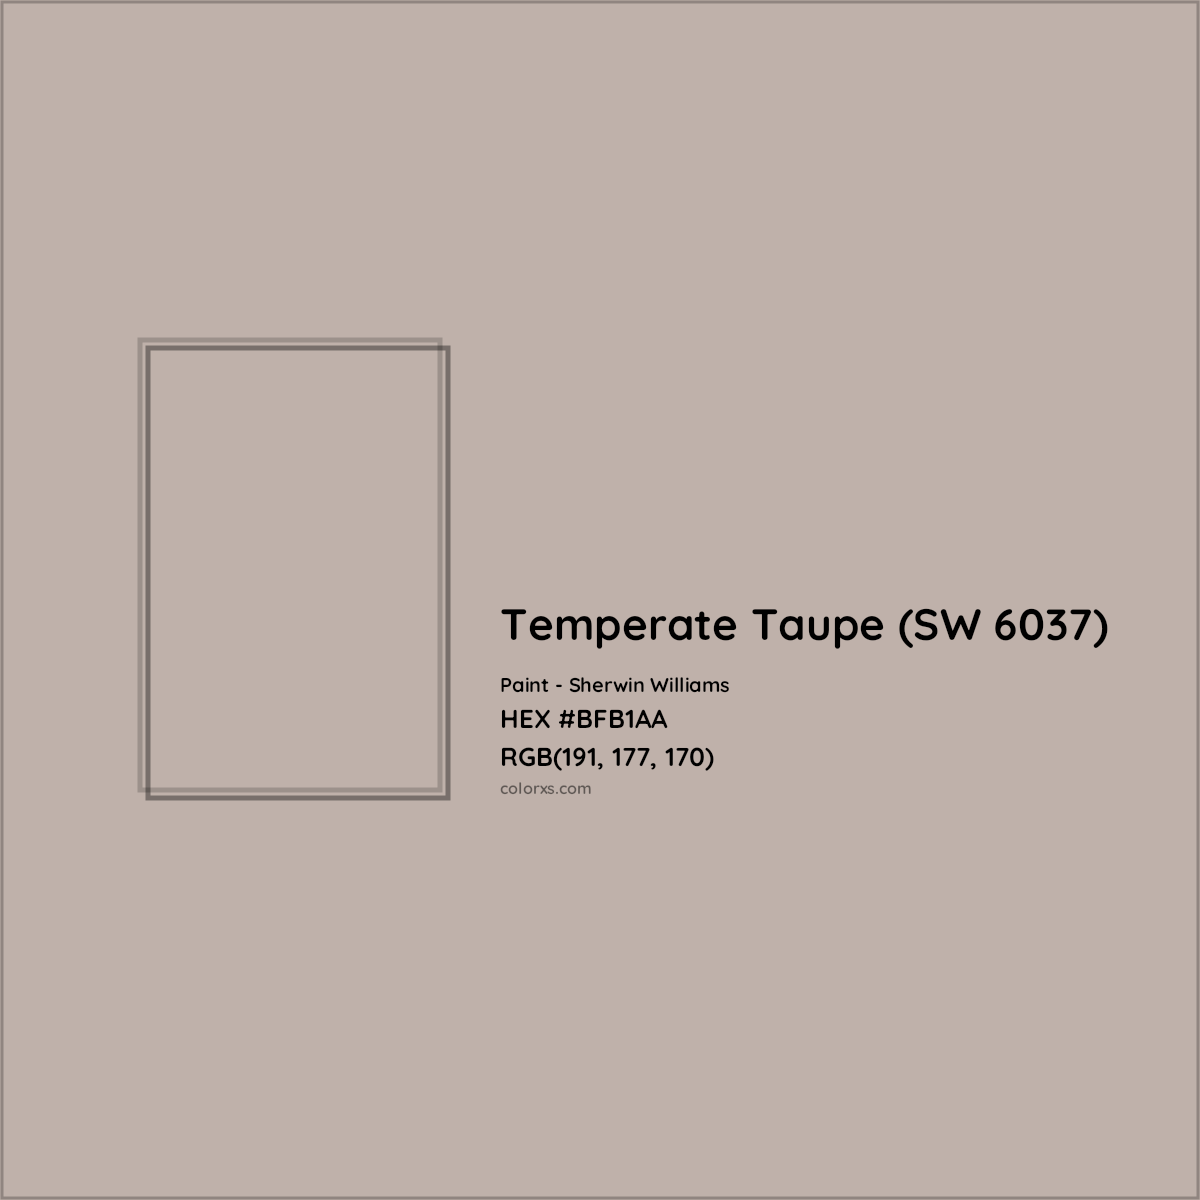 HEX #BFB1AA Temperate Taupe (SW 6037) Paint Sherwin Williams - Color Code